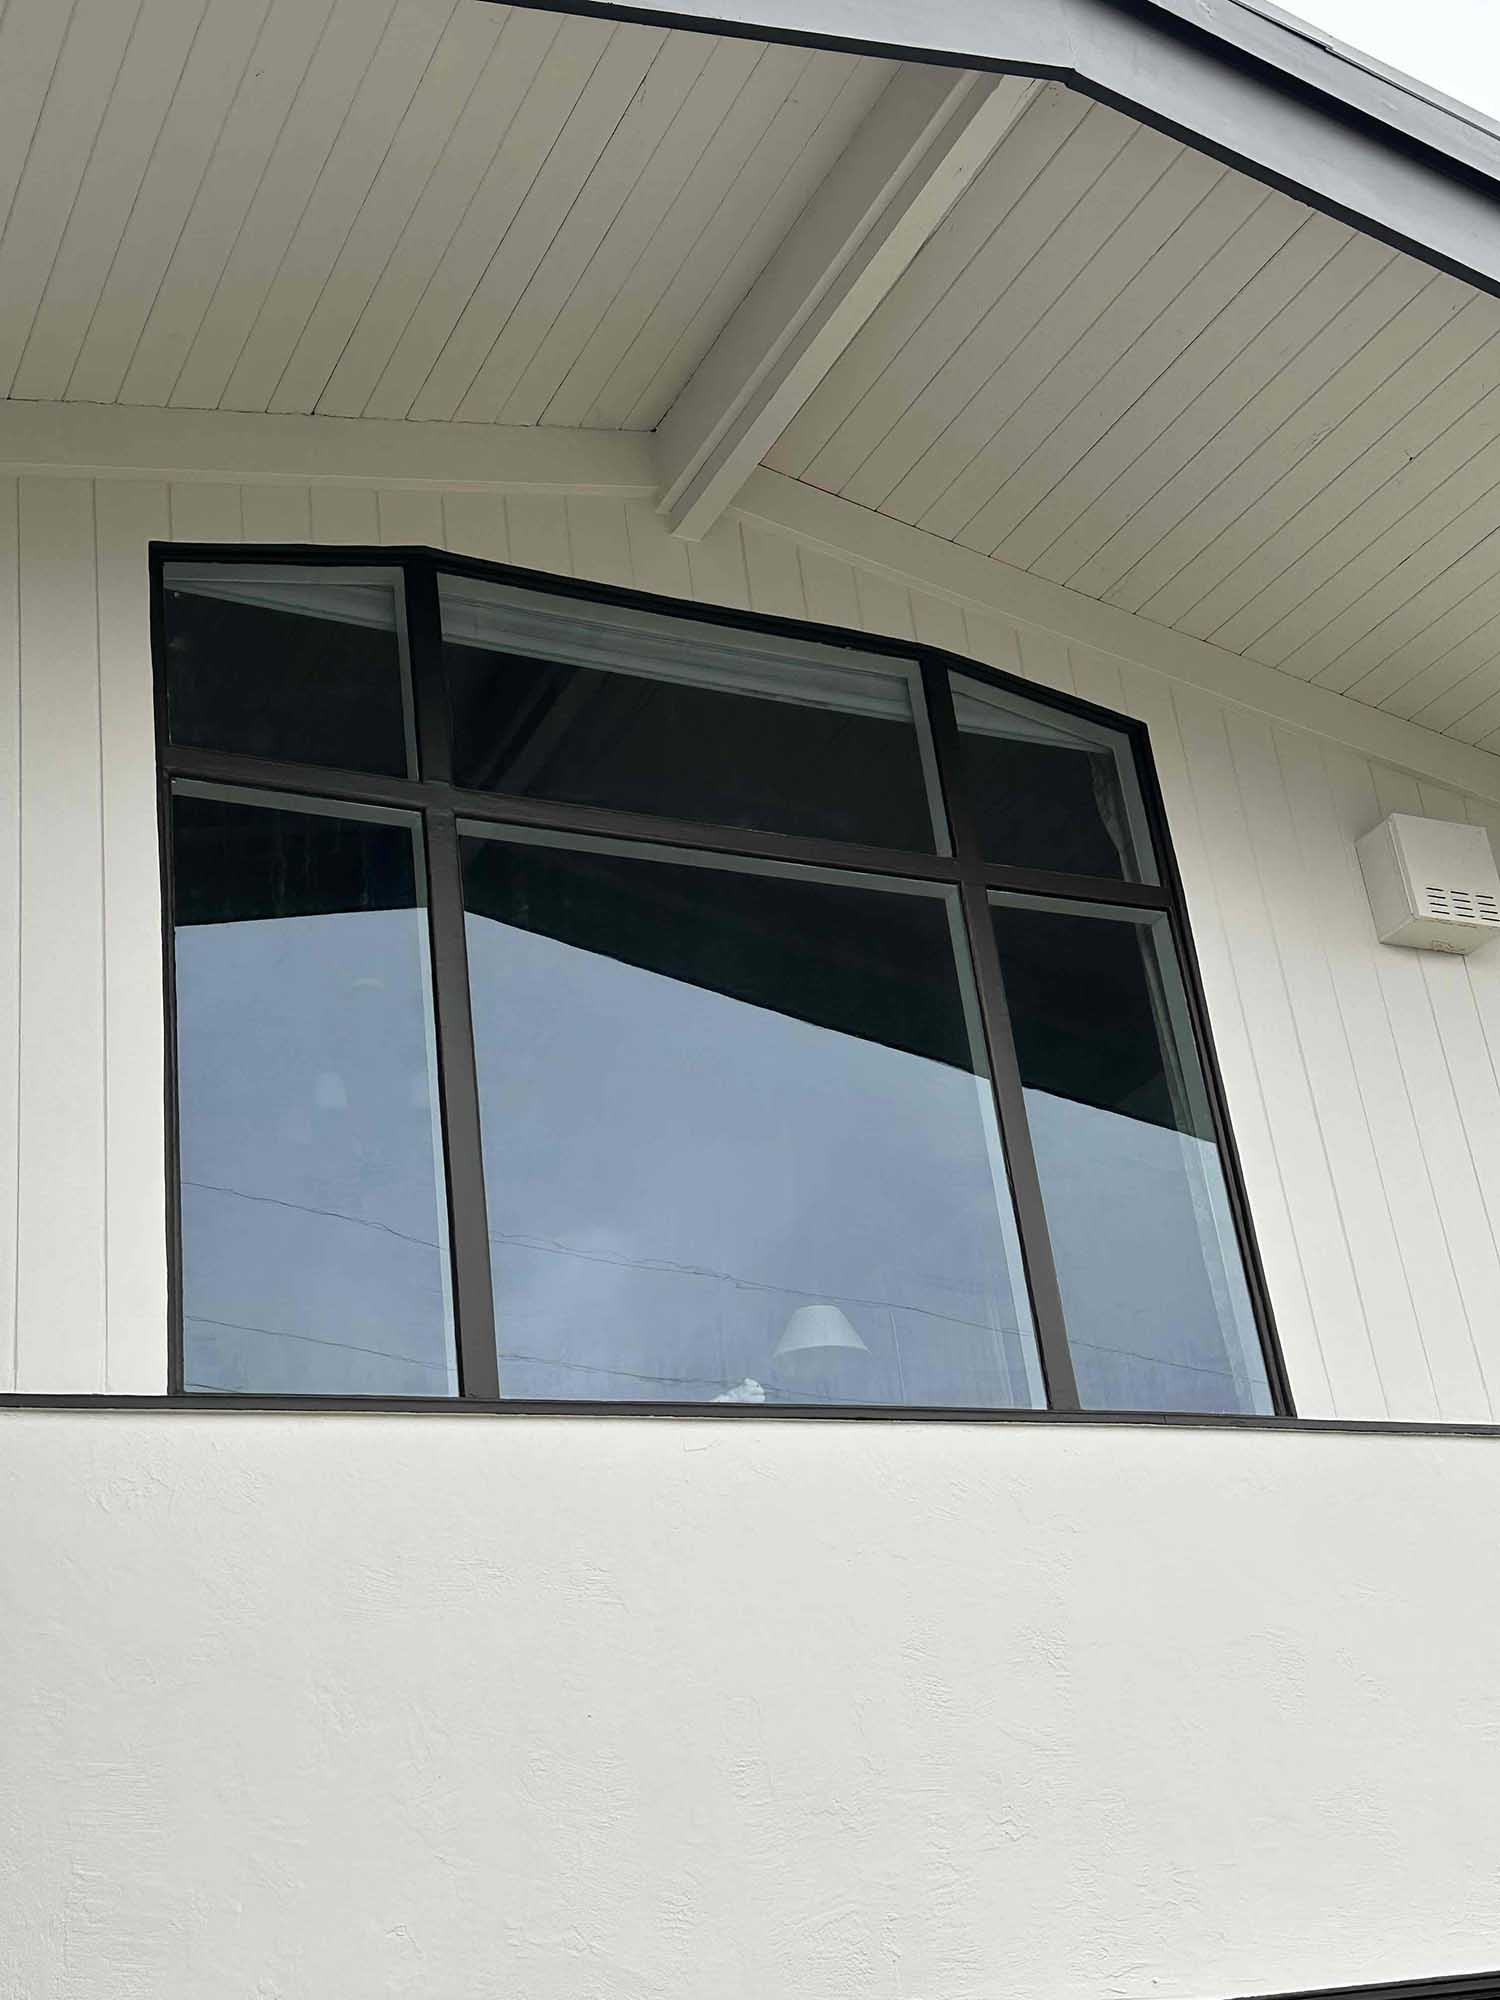 The best window film for your El Cerrito, CA home is from 3M. Ask ClimatePro for a free estimate.